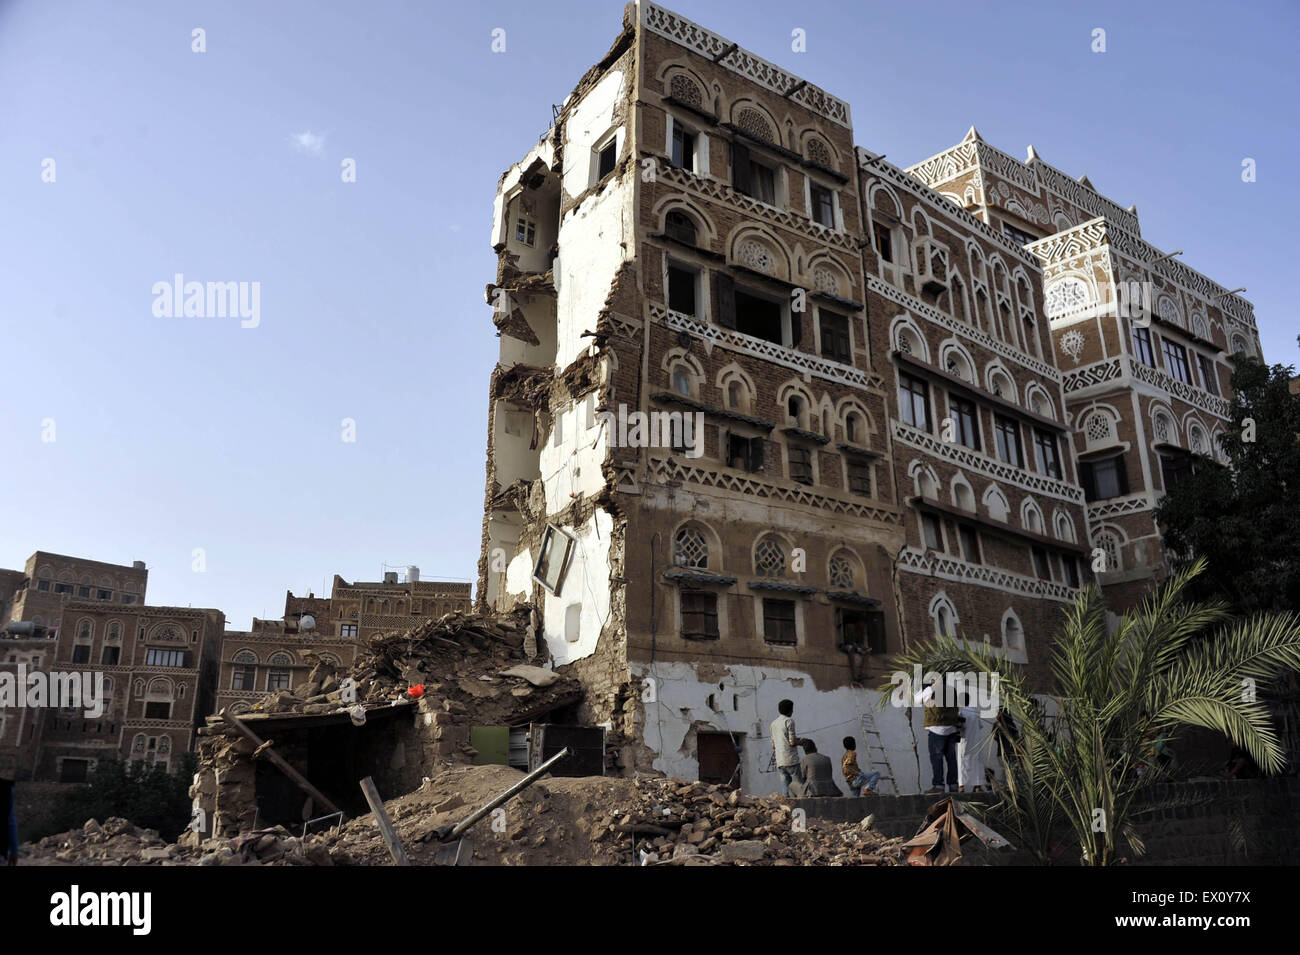 Sanaa, Yemen. 3rd July, 2015. Yemenis stand near a historical building destroyed by the airstrike of Saudi-led coaltion forces in the Old City of Sanaa in Sanaa, Yemen, on July 3, 2015. The United Nations Educational, Scientific and Cultural Organization (UNESCO) World Heritage Committee on July 2 added two sites in Yemen on the List of World Heritage in Danger: the Old City of Sanaa and the Old Walled City of Shibam. Credit:  Hani Ali/Xinhua/Alamy Live News Stock Photo